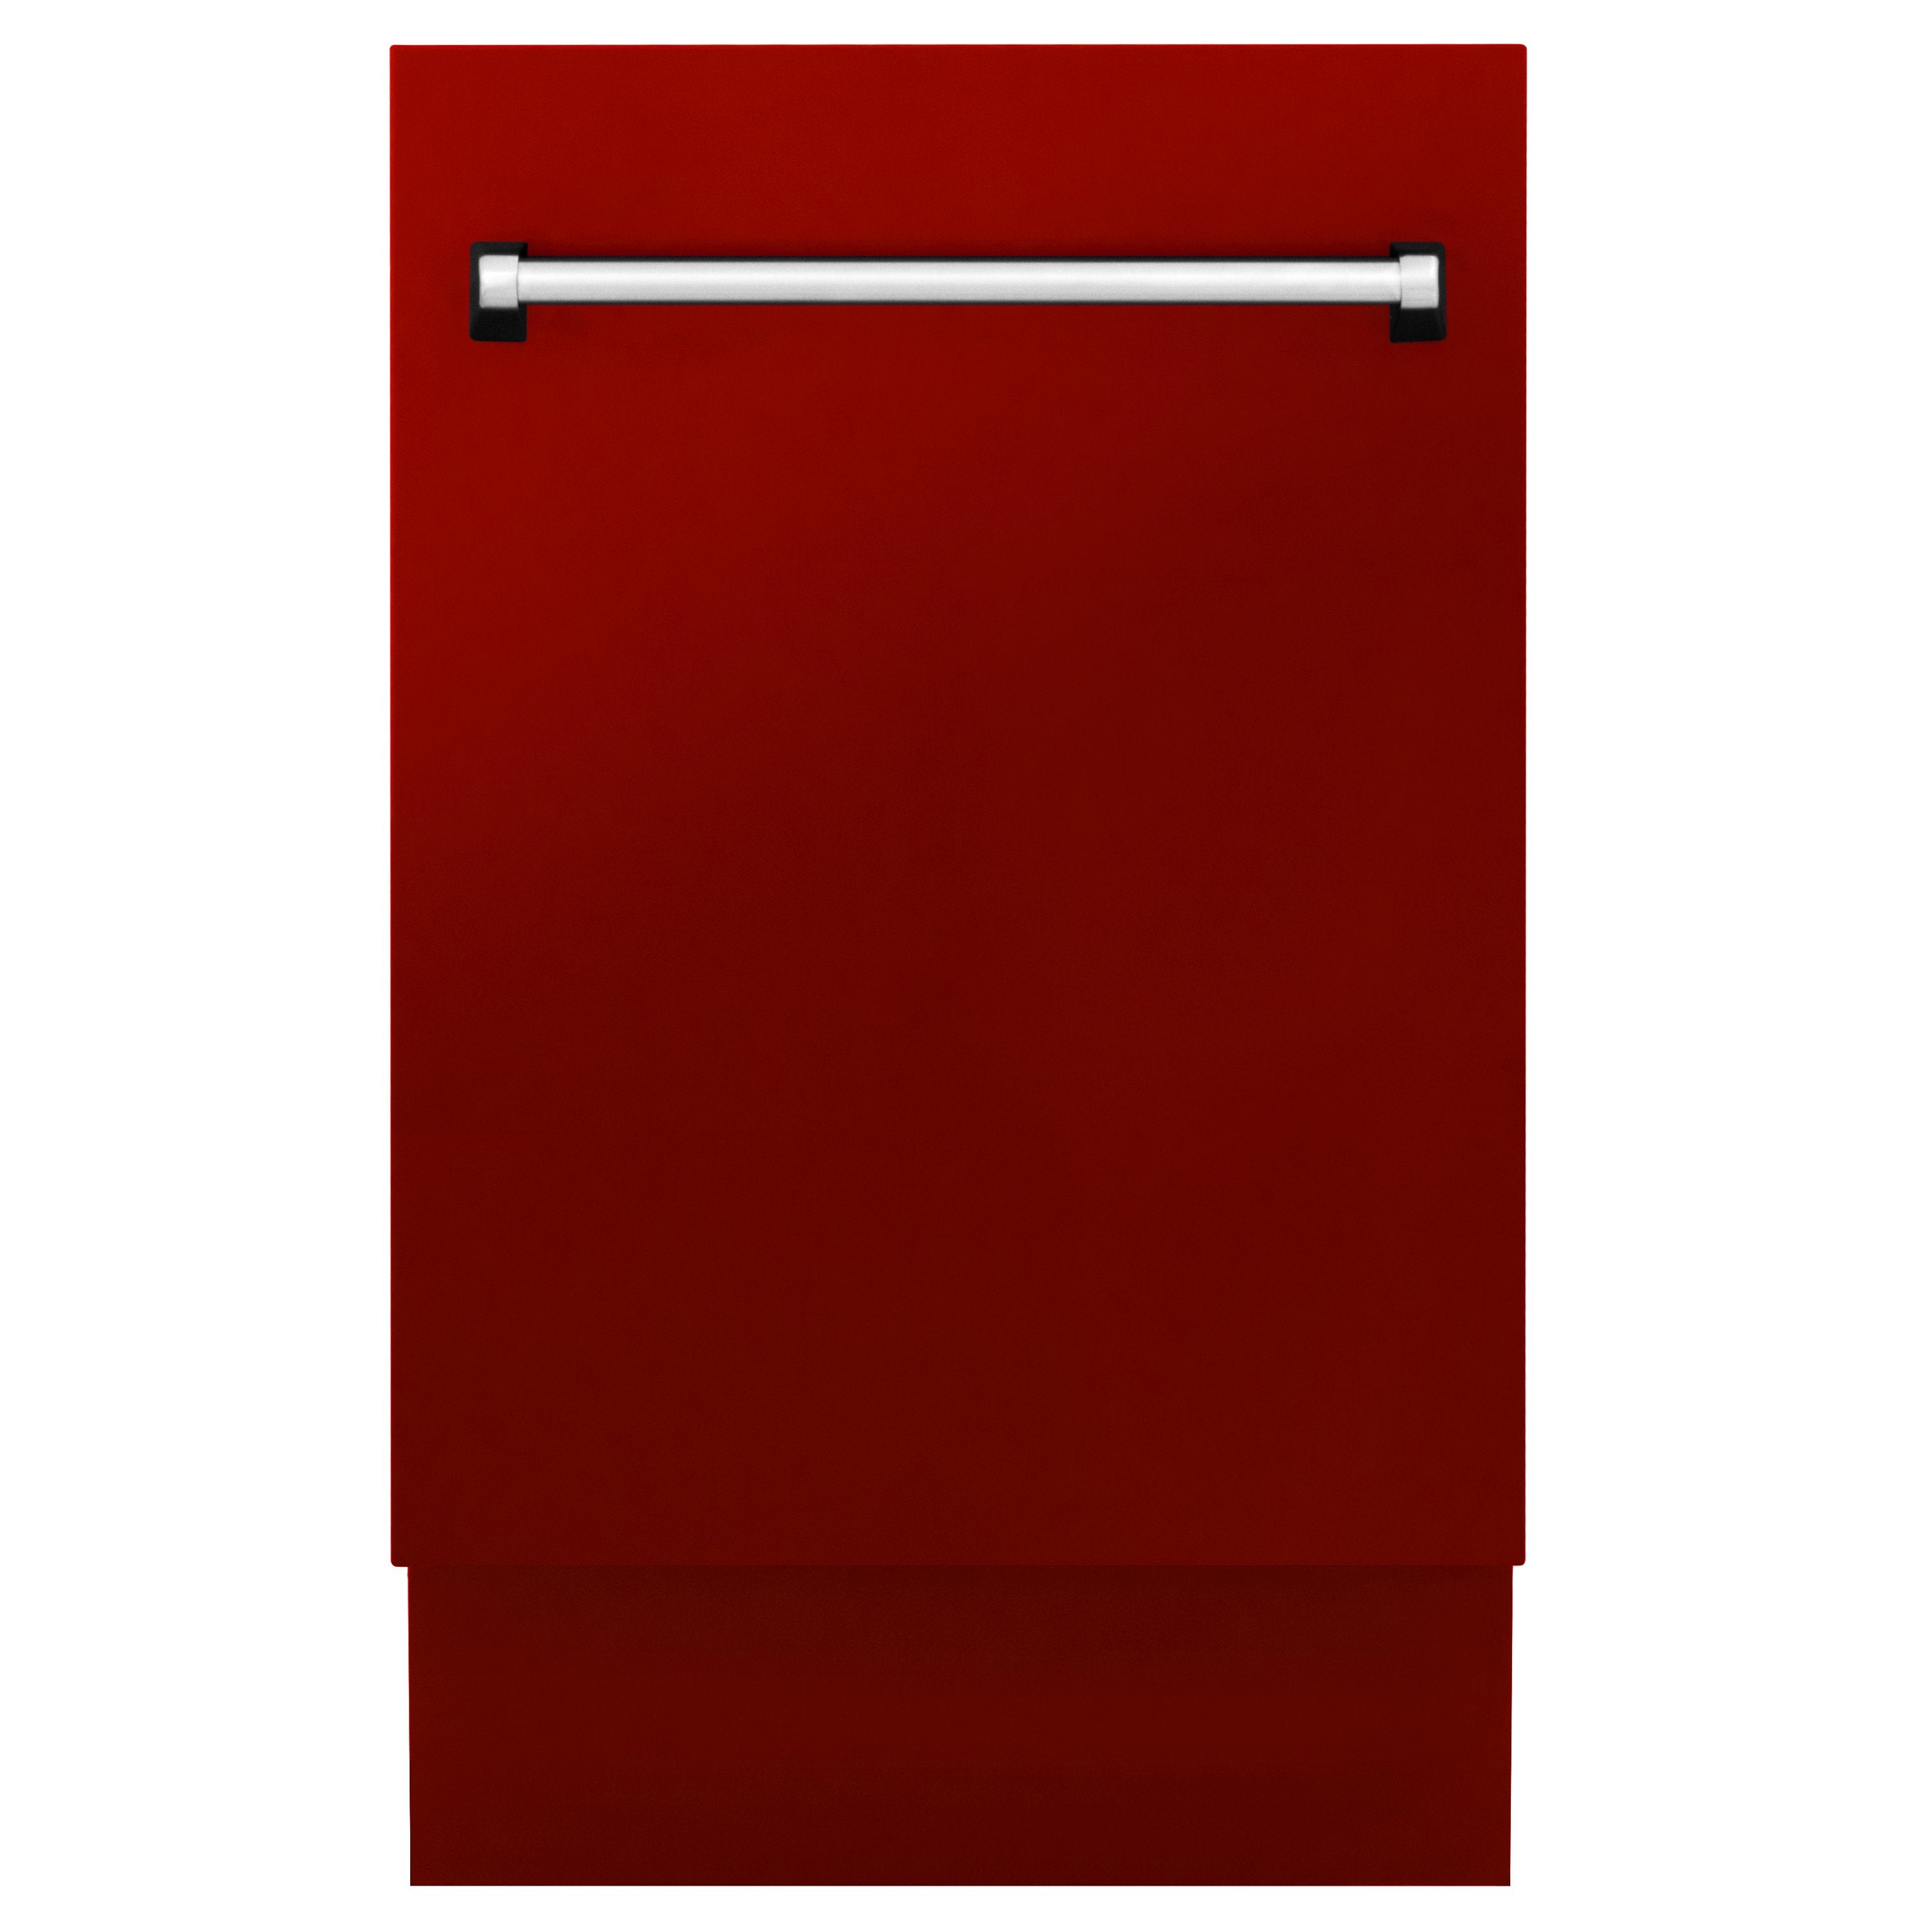 ZLINE 18 in. Top Control Tall Dishwasher in Red Gloss with 3rd Rack